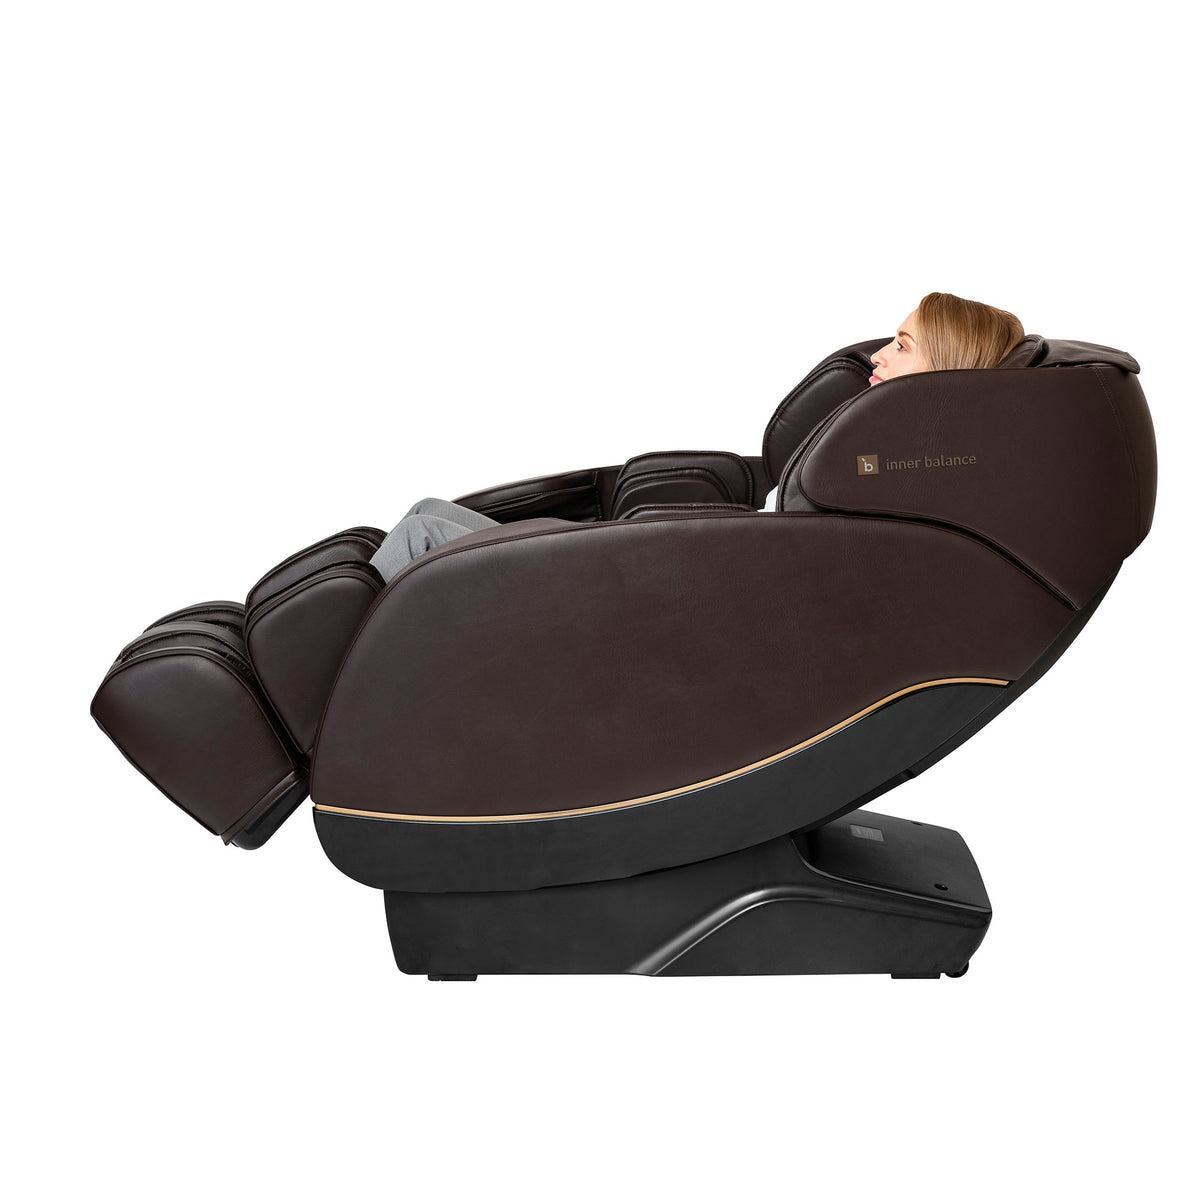 Side-view of a woman enjoying a partially reclined Inner Balance Wellness Jin 2.0 Massage Chair in brown leather with detailed stitching